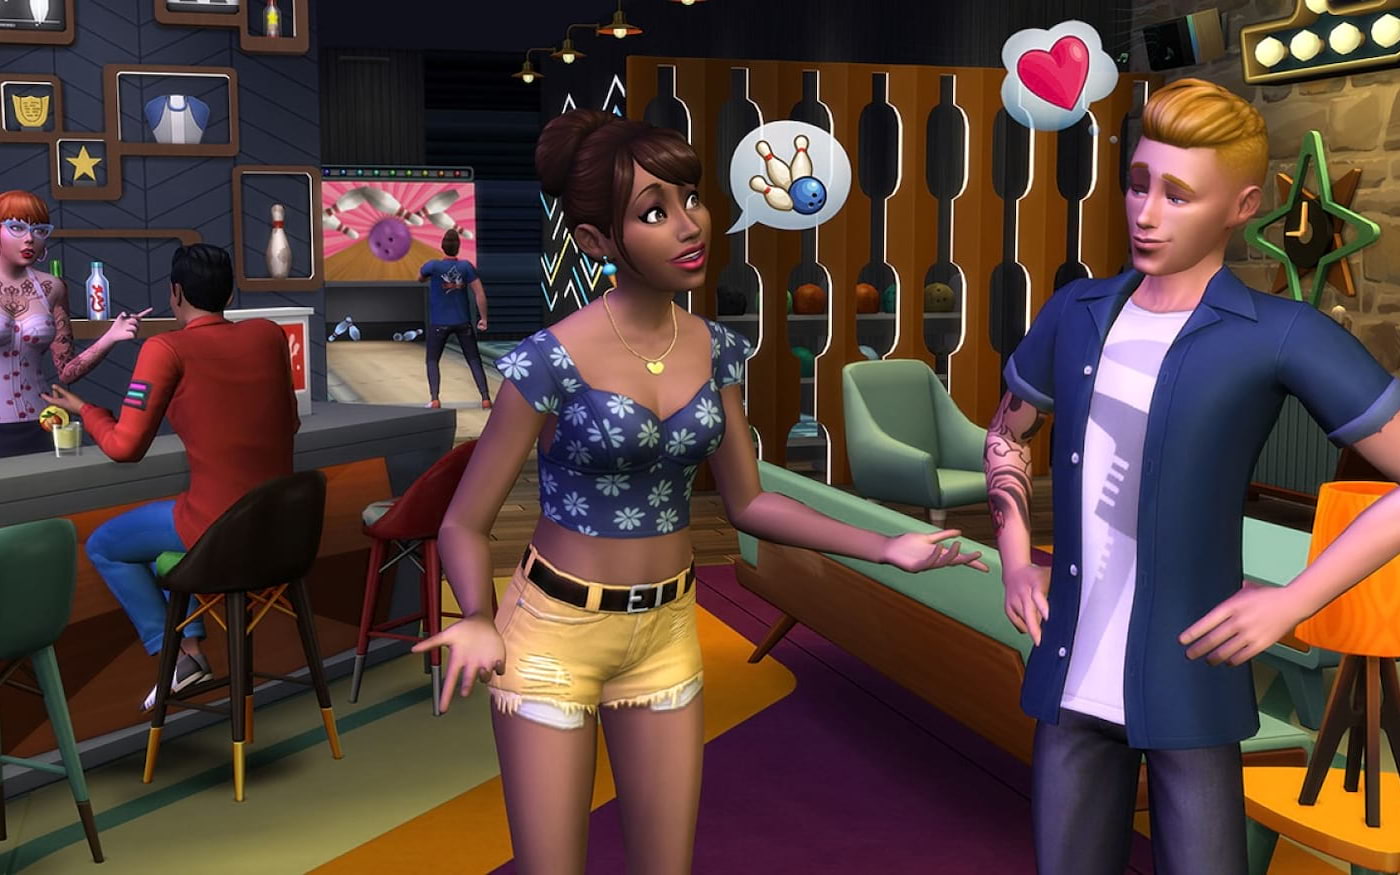 The Sims 5 appears to be in production and will focus on online interactions